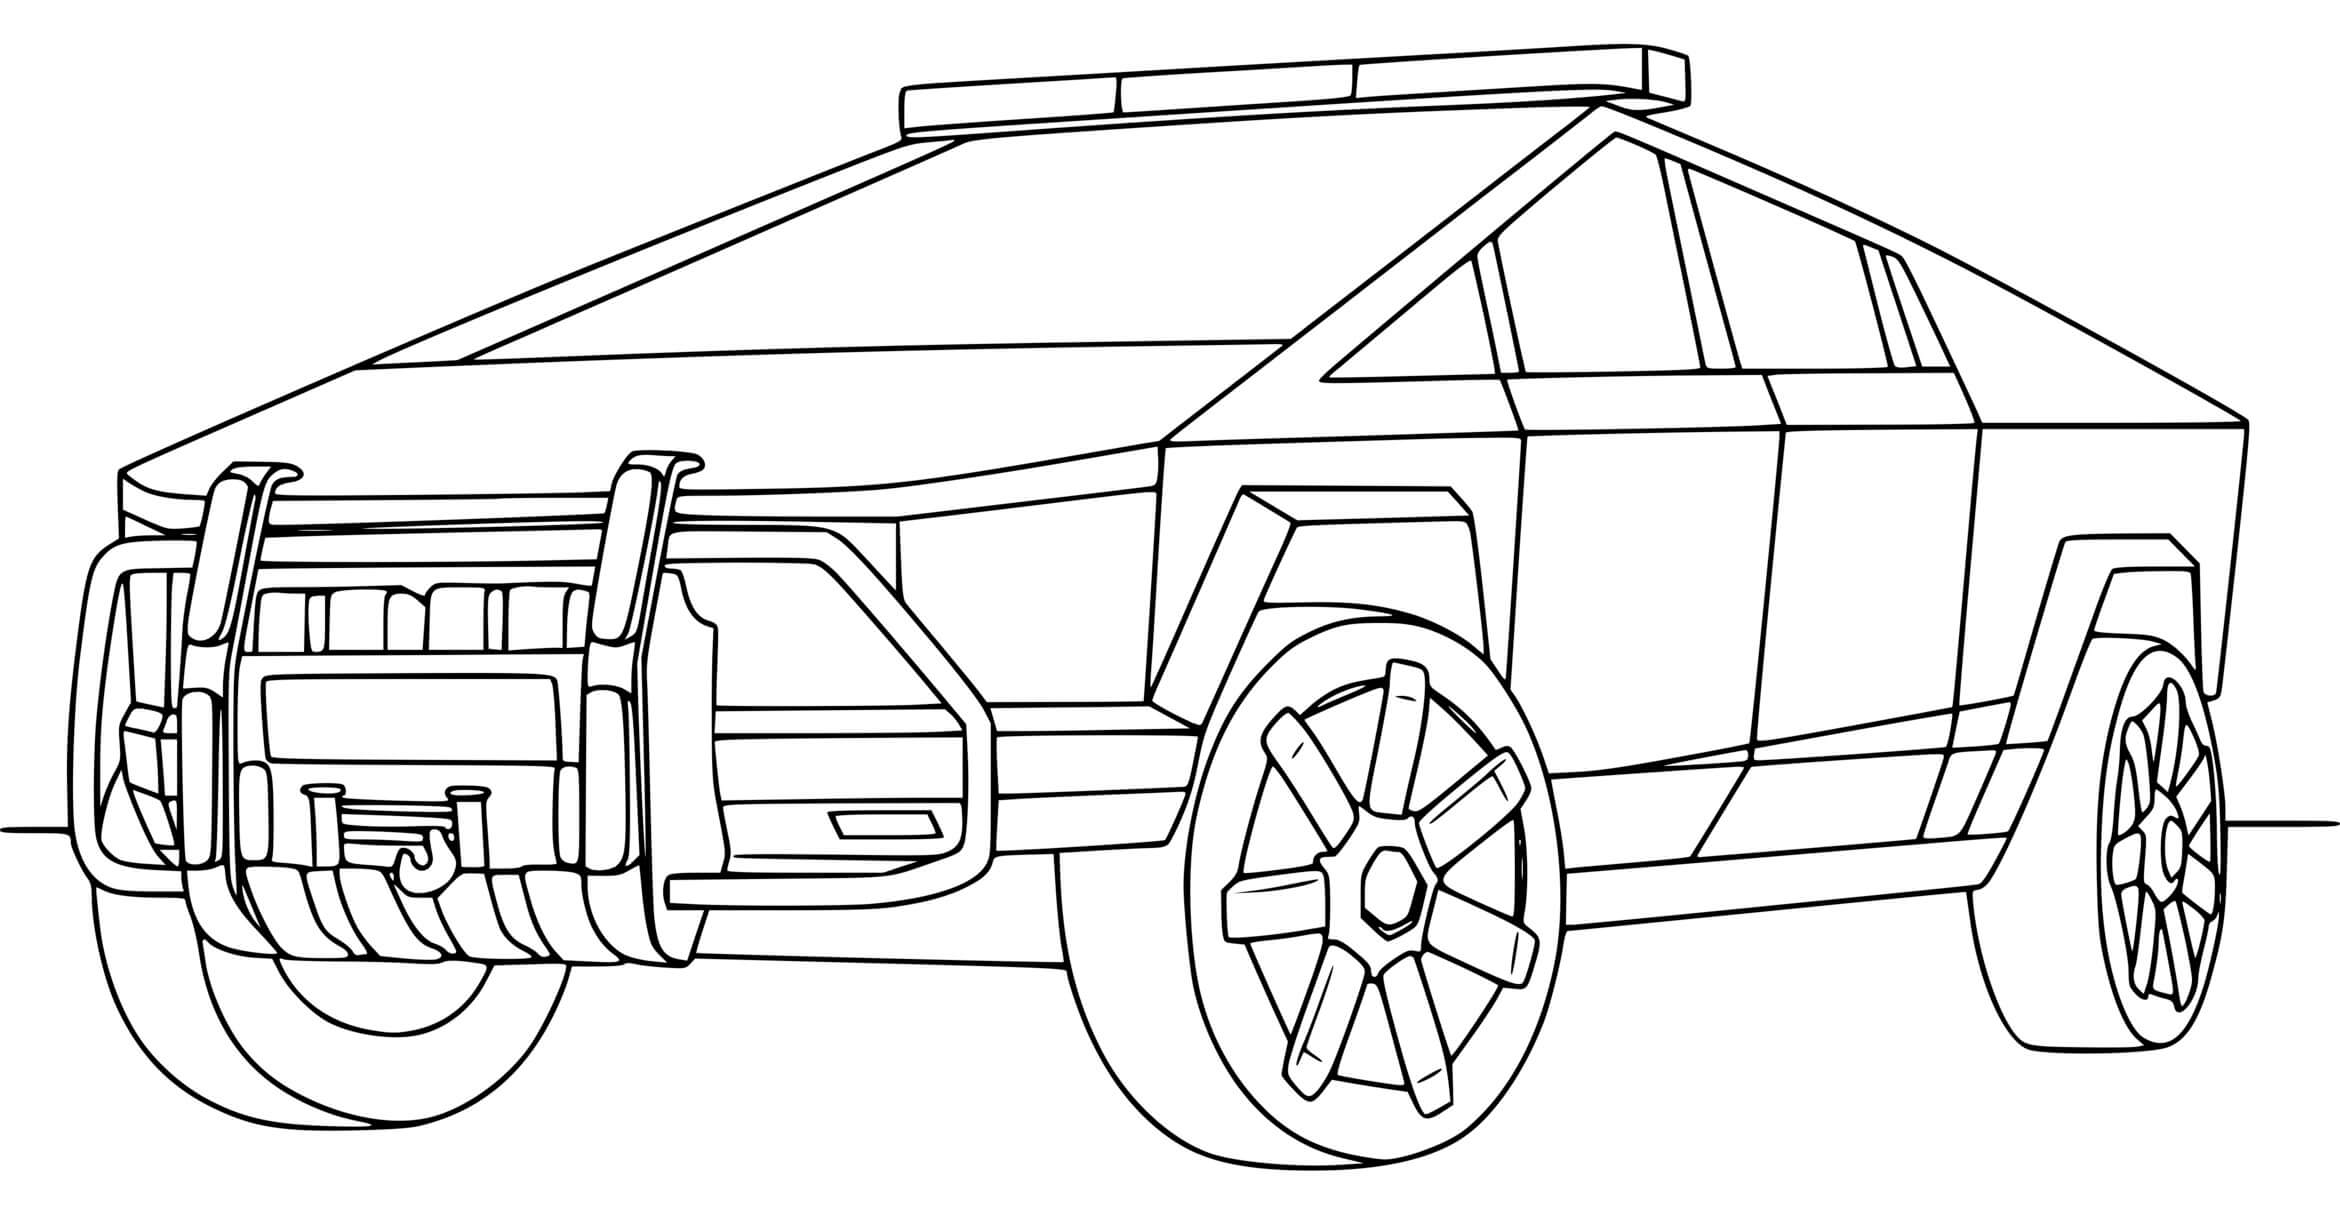 Police Tesla Cybertruck Coloring Page